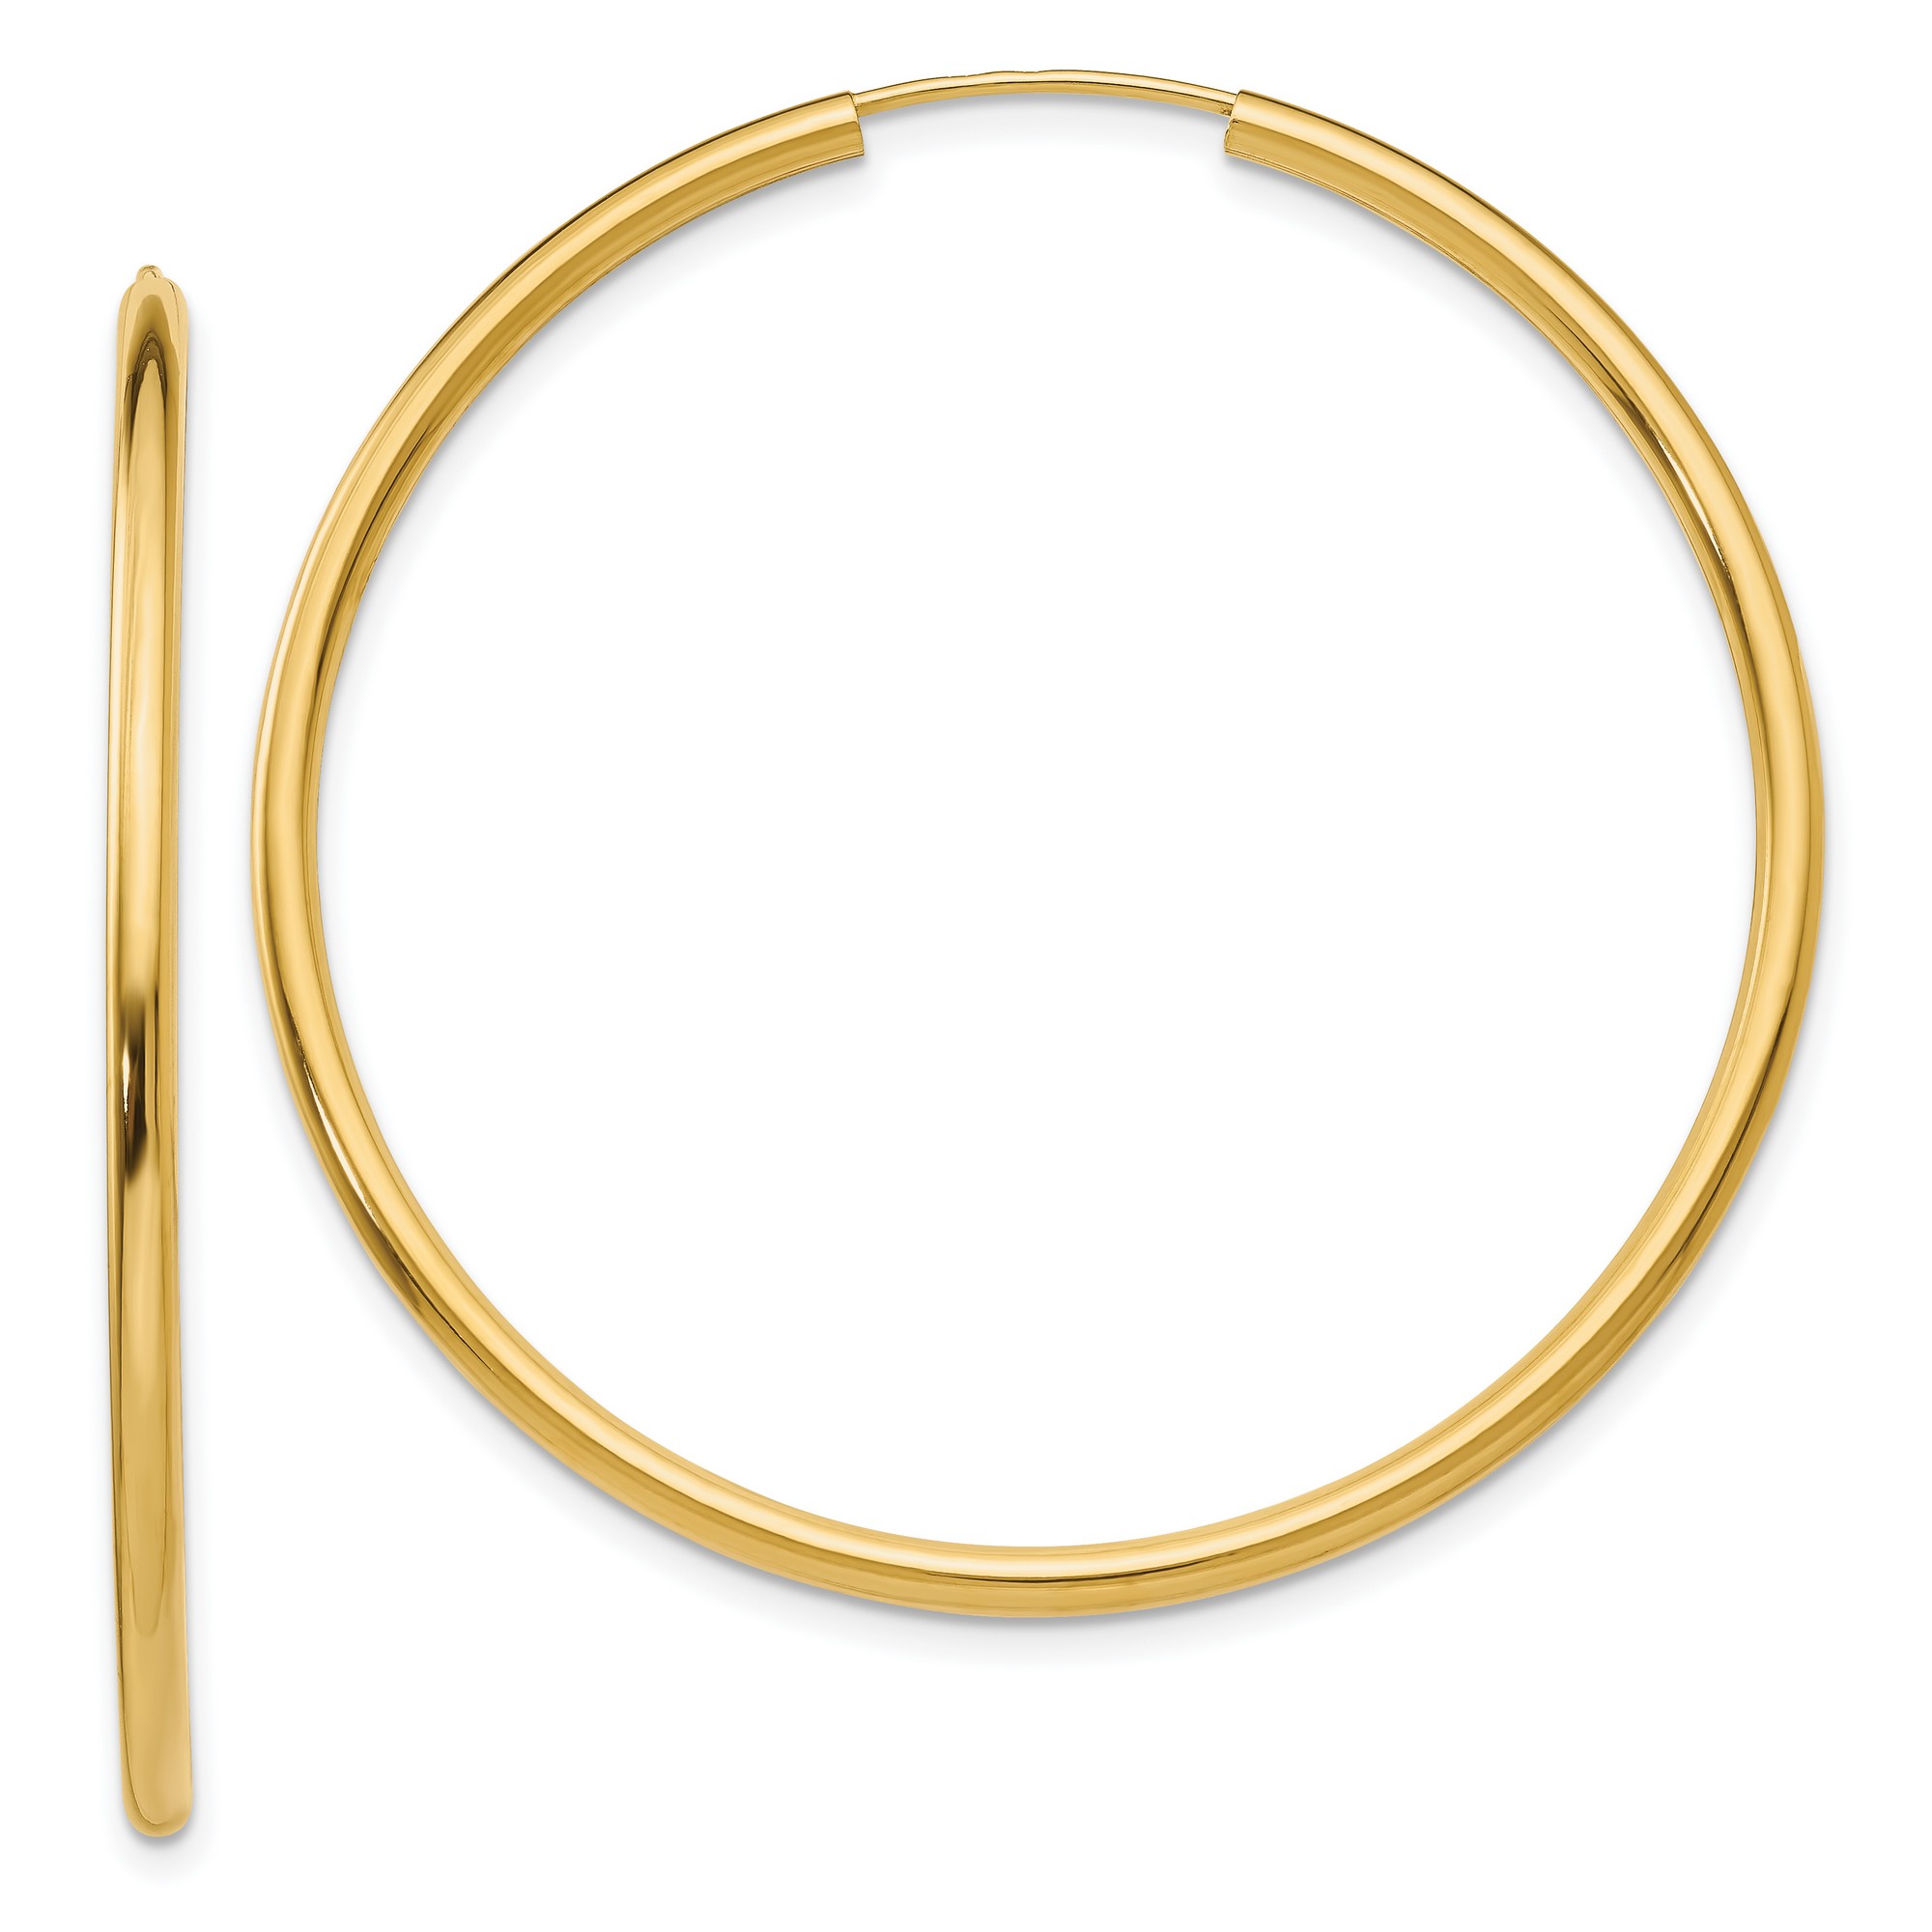 2mm Endless Hoop Earrings Polished in Real 14k Yellow Gold 45 mm